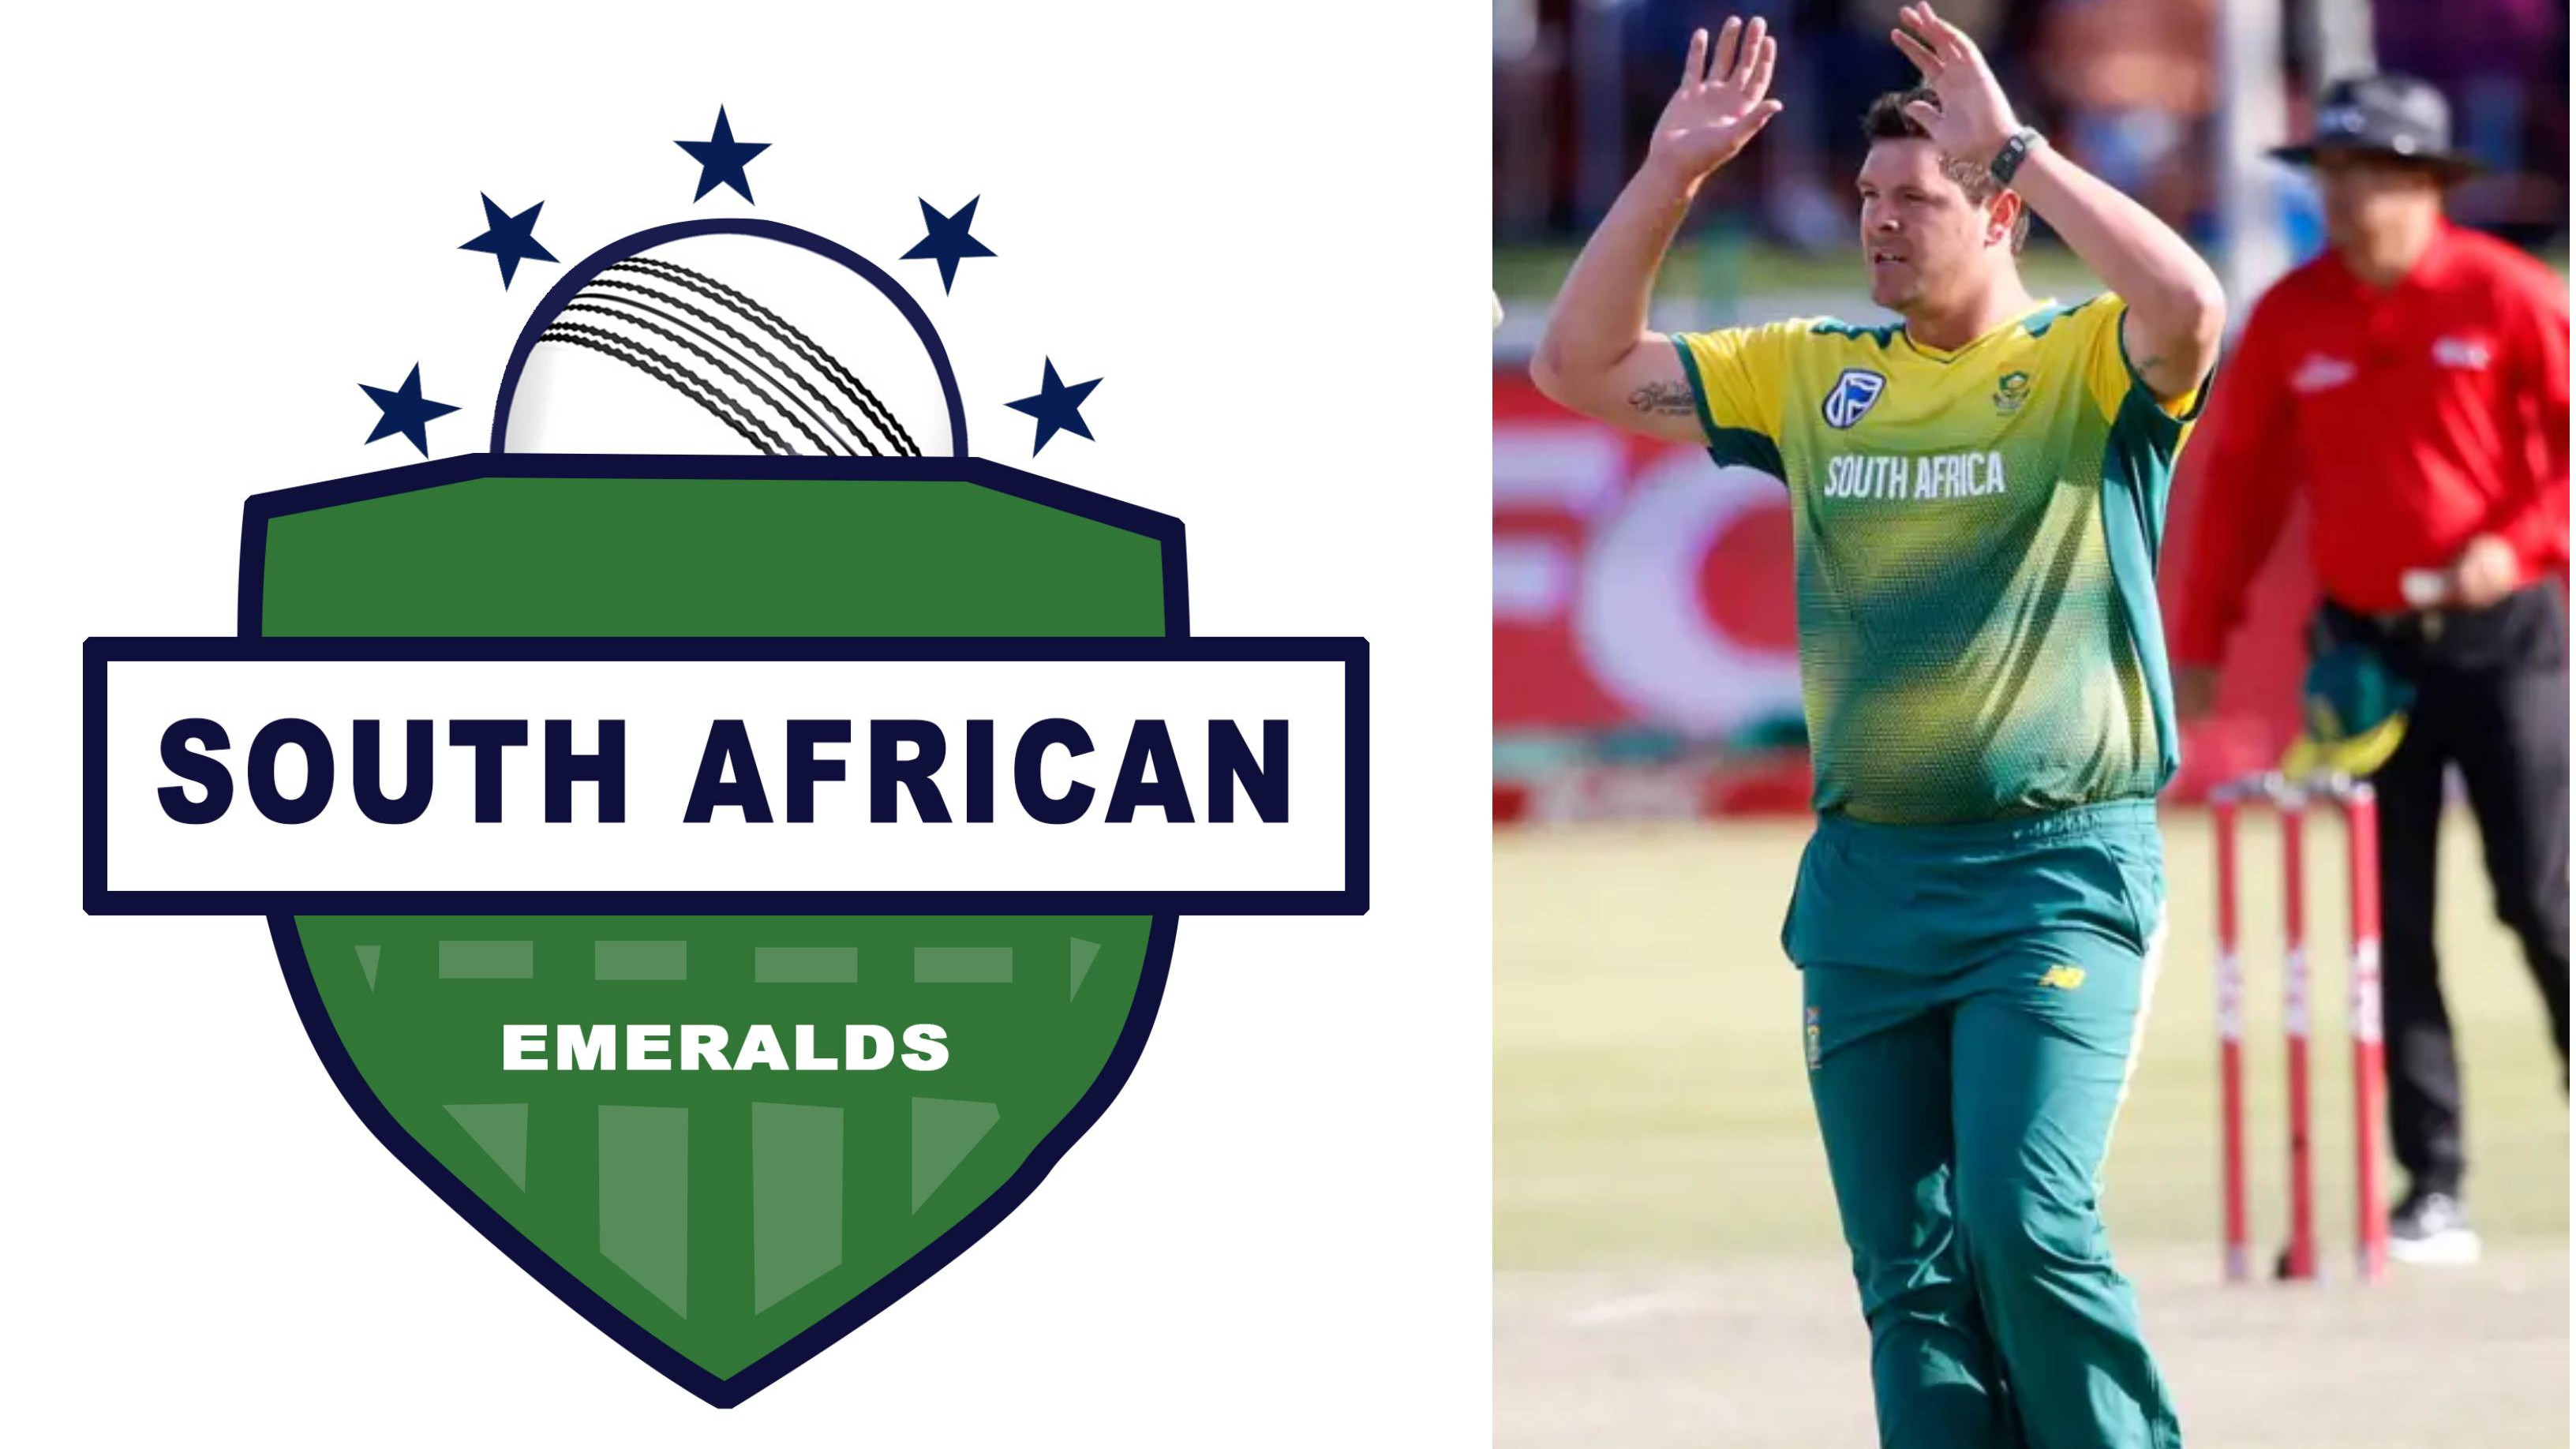 Robert Frylinck to lead South African Emeralds in the inaugural GPCL season